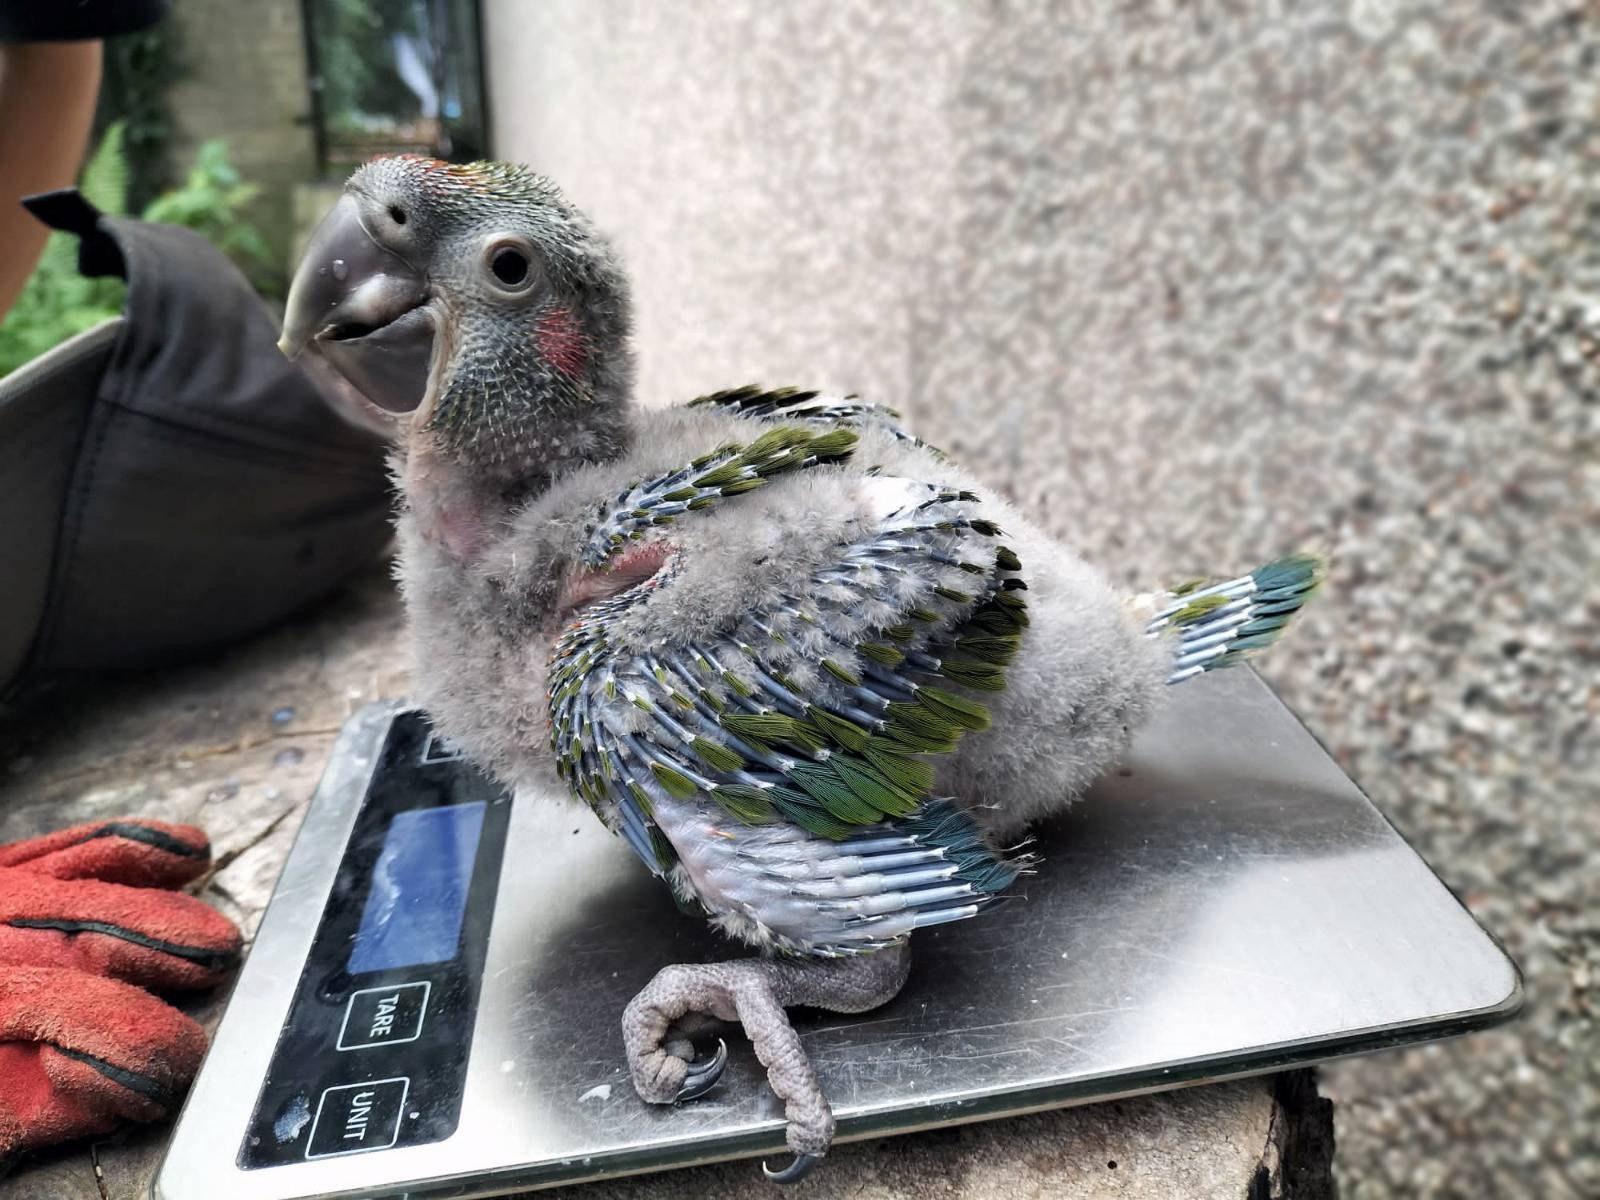 Red fronted macaw chick on scales being weighed IMAGE: Lorna Moffat 2023